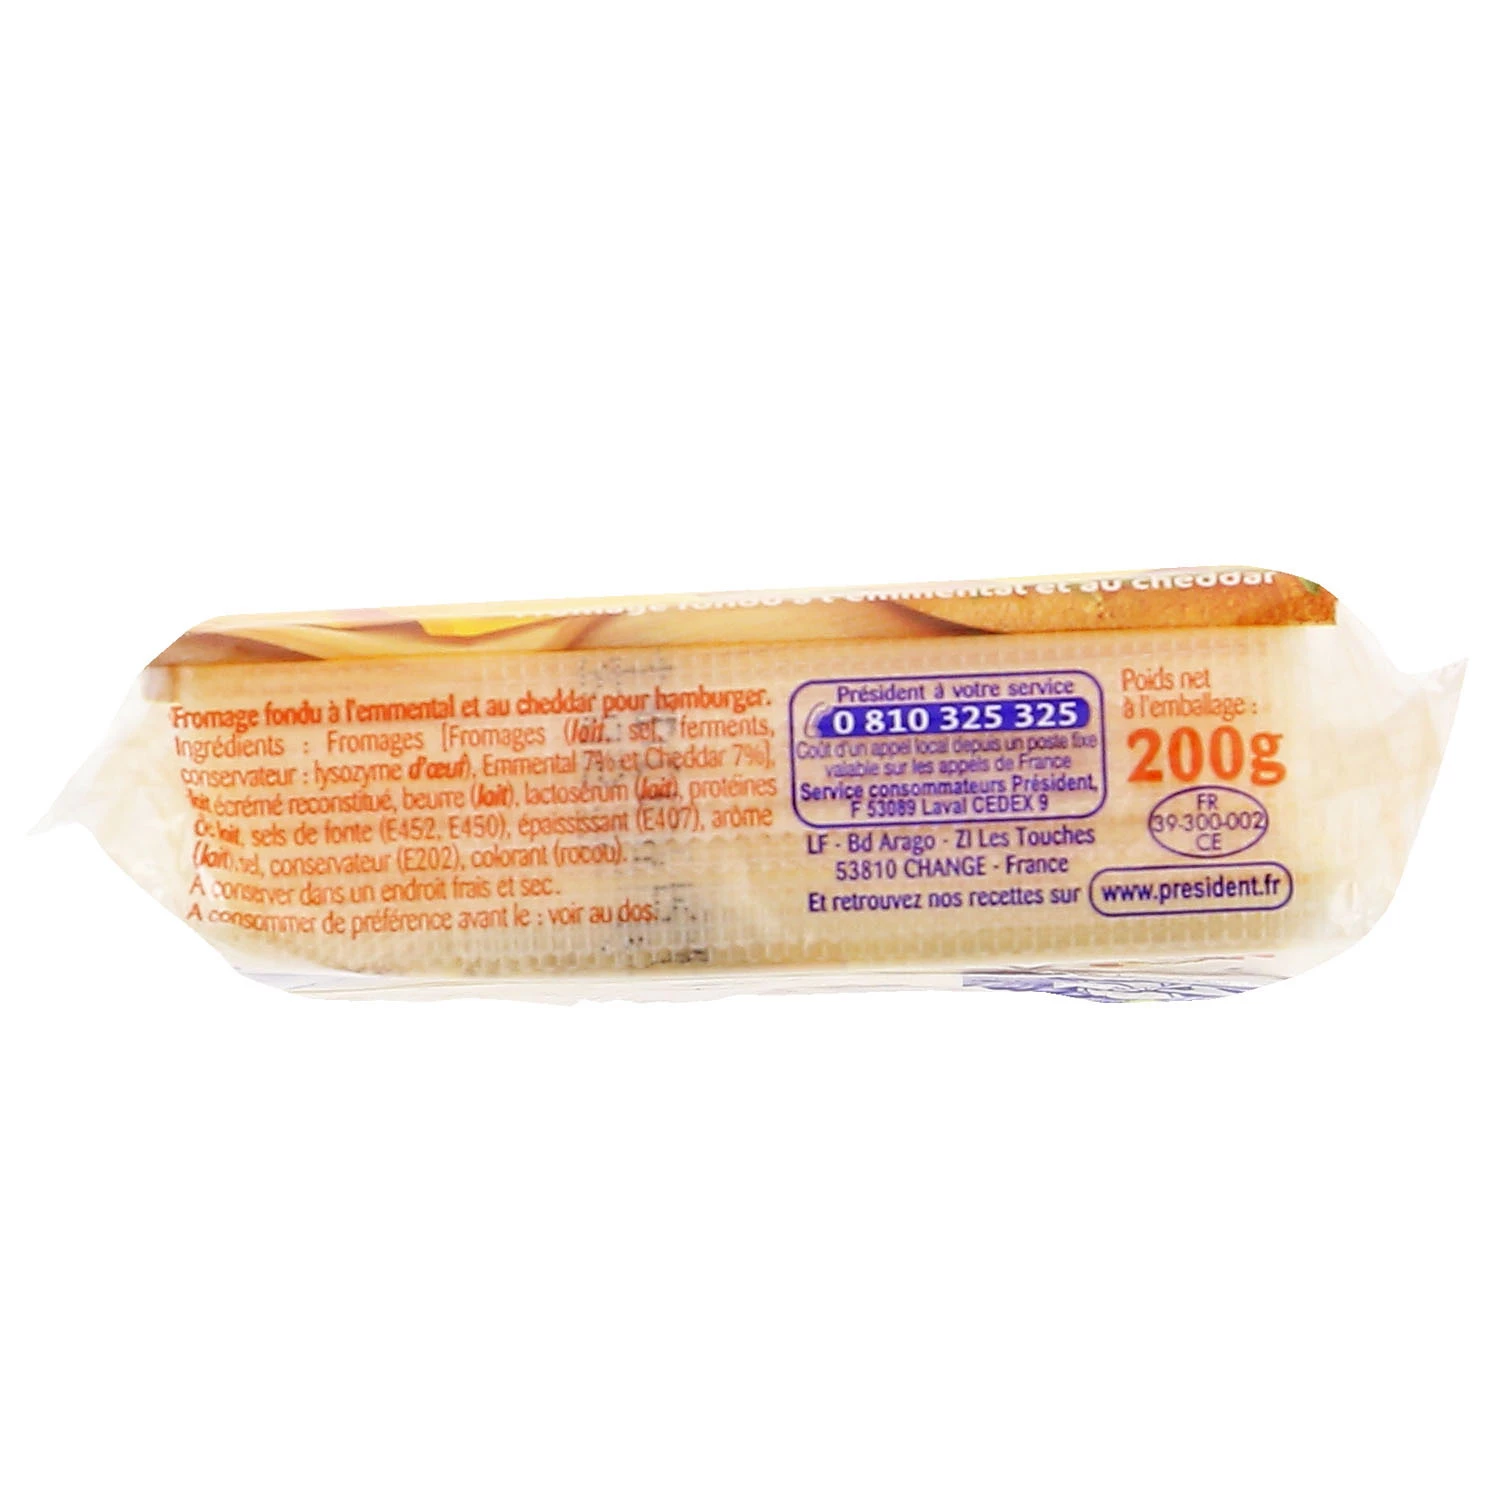 President Burger Cheddar & Emmental cheeses 12 x slices 200g